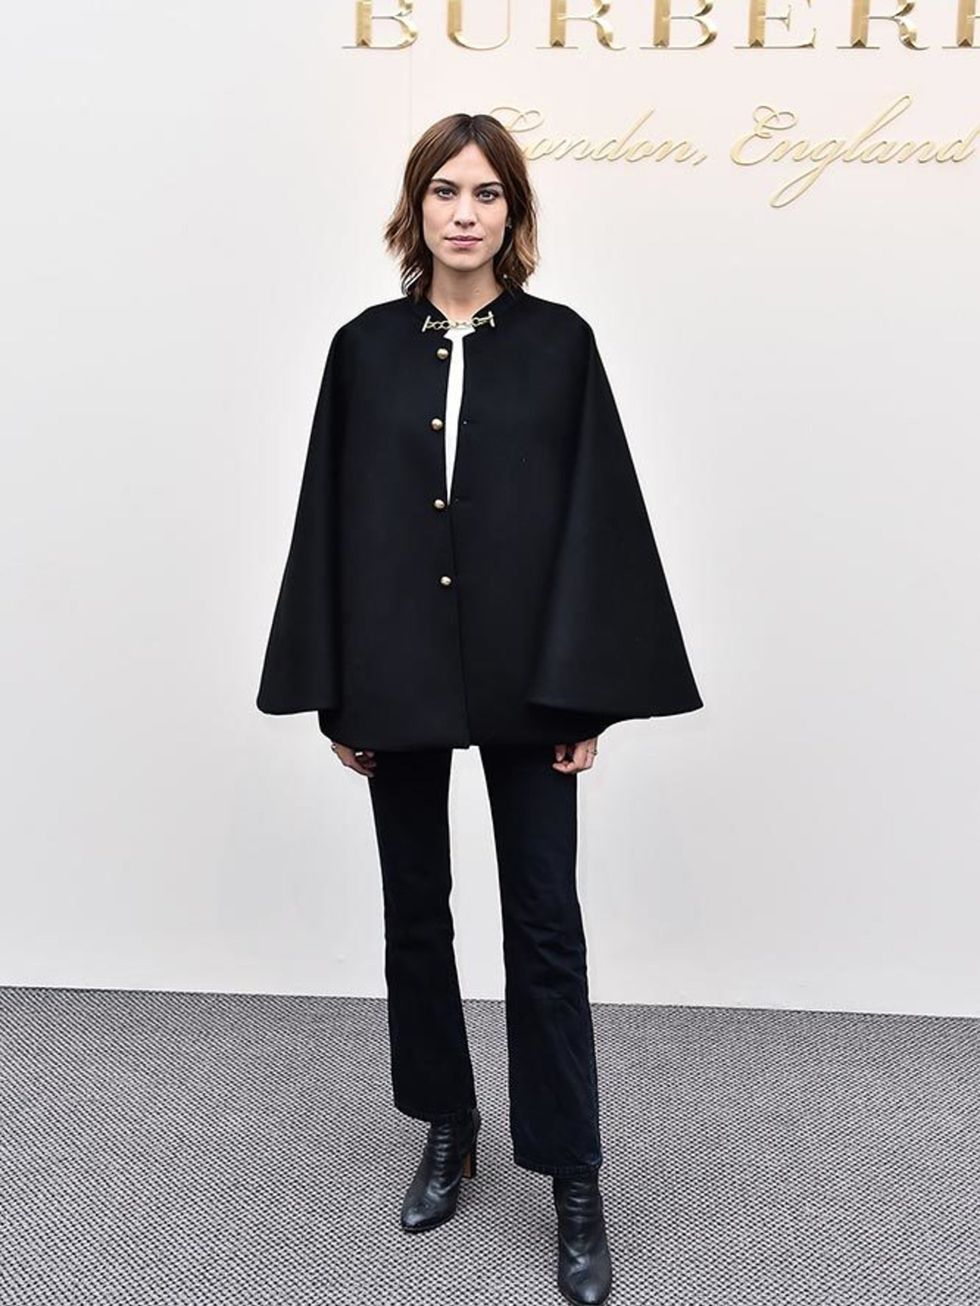 Alexa Chung at the Burberry AW16 show during London Fashion Week, February 2016.